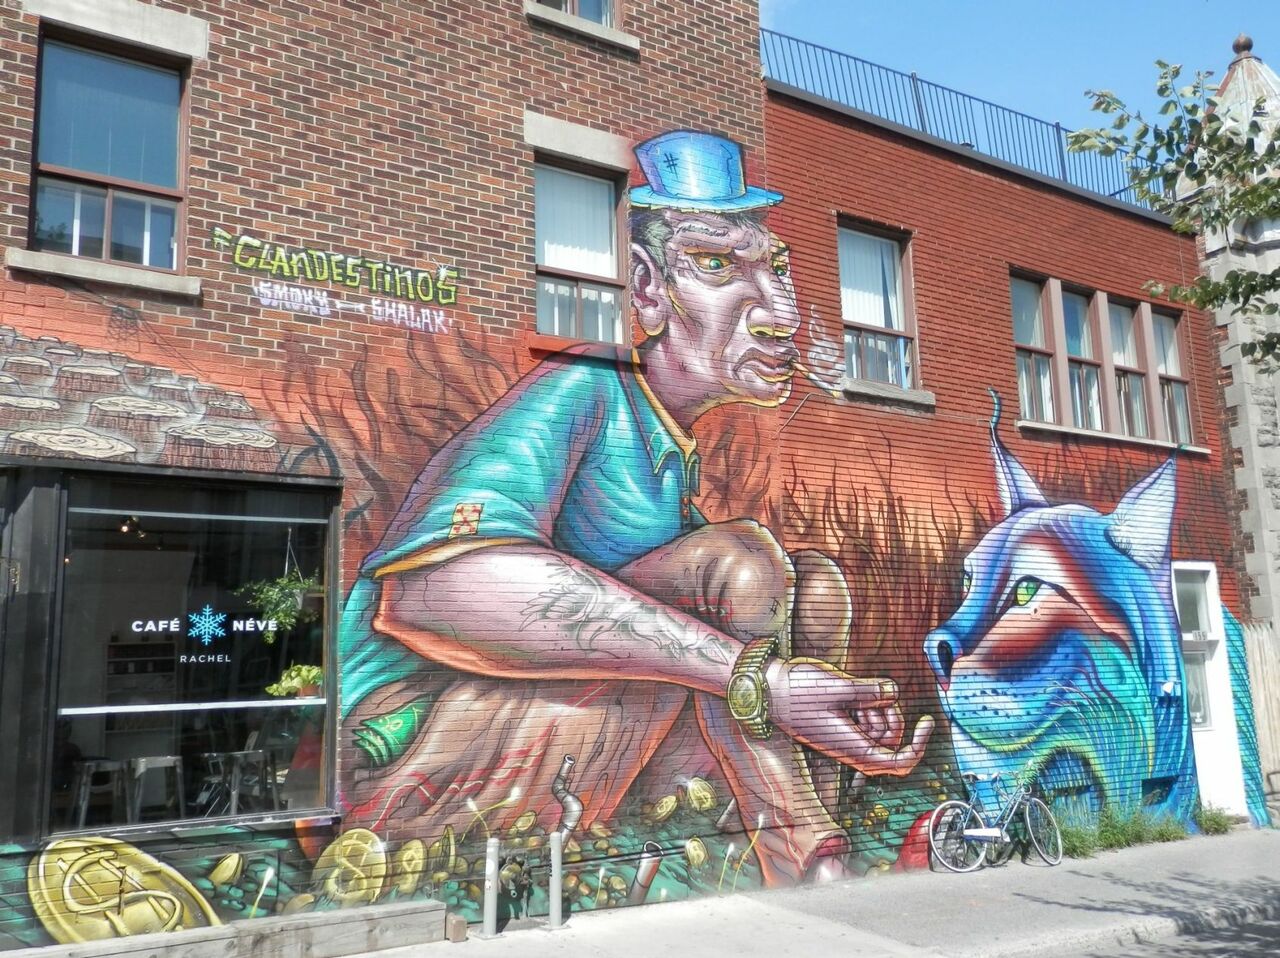 #Graffiti Large #Montreal #Streetart and fun to look at, but I'm unsure of the artist. "Clandestinos" https://t.co/wlbpGPb4Dc